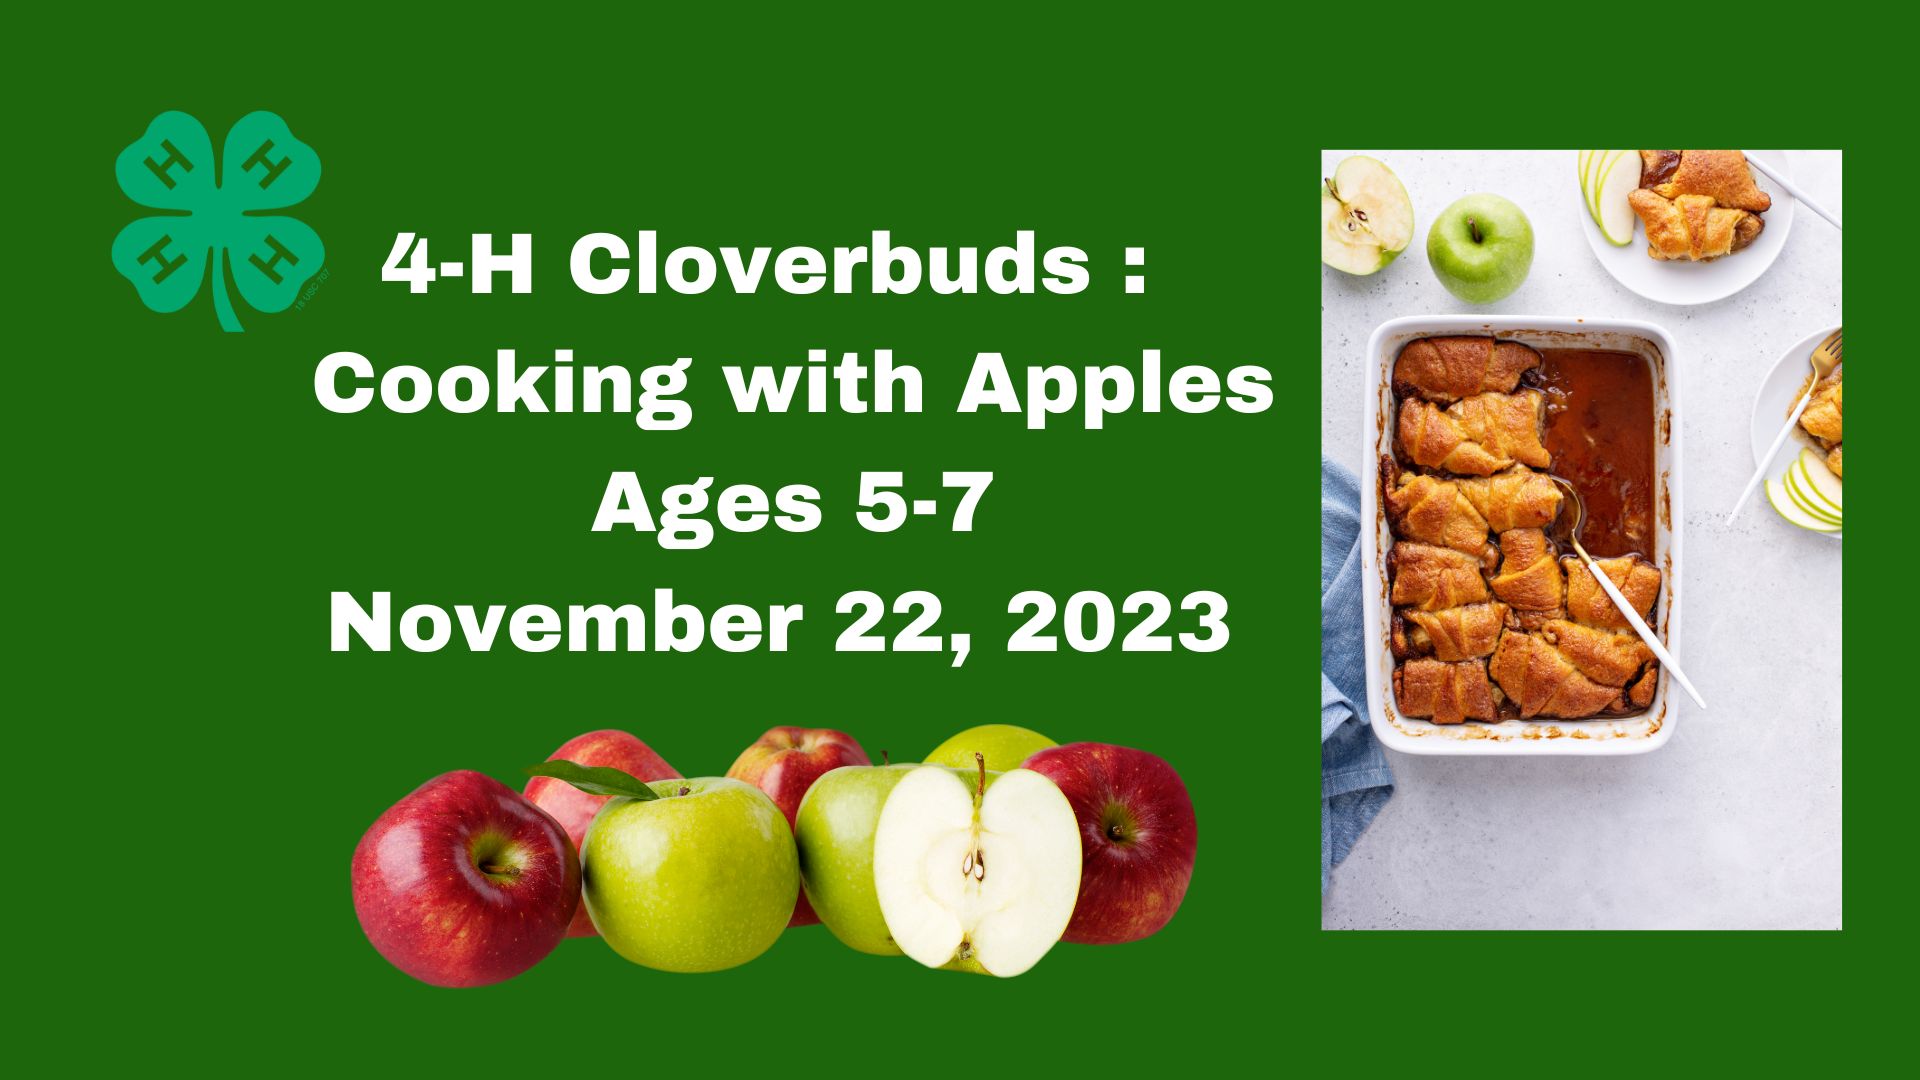 4-H cloverbuds cooking with apples flyer